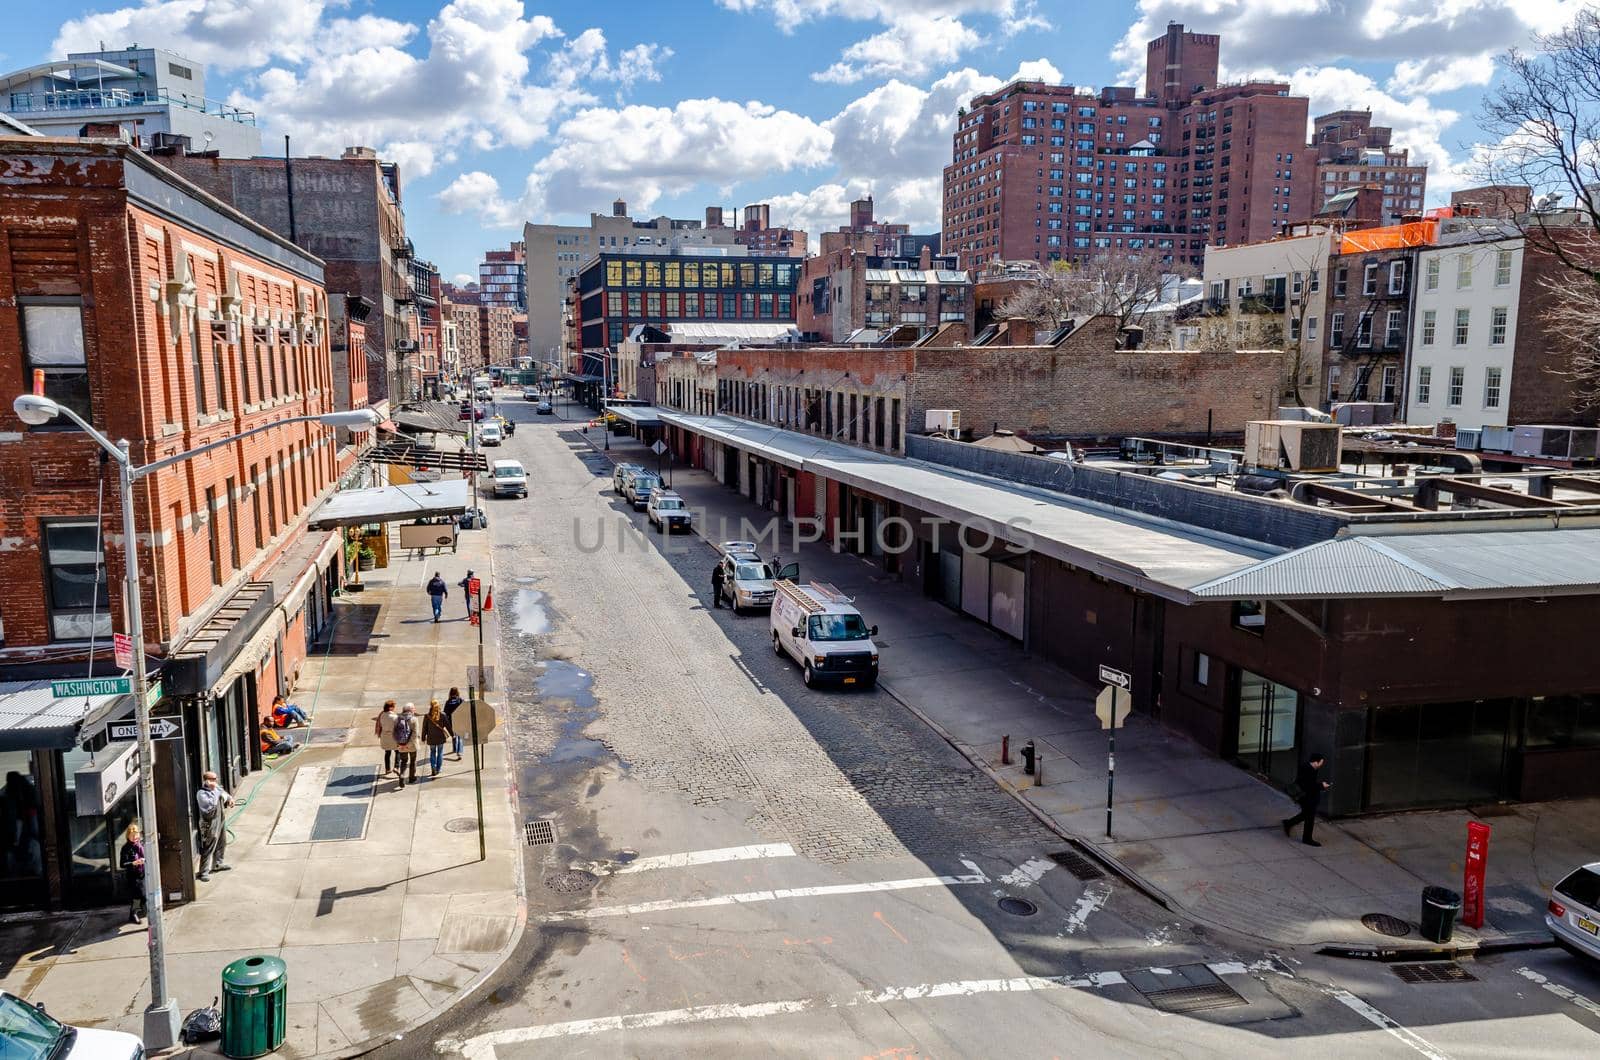 City Street in Chelsea, aerial view, NYC, view from the High Line Rooftop Park by bildgigant